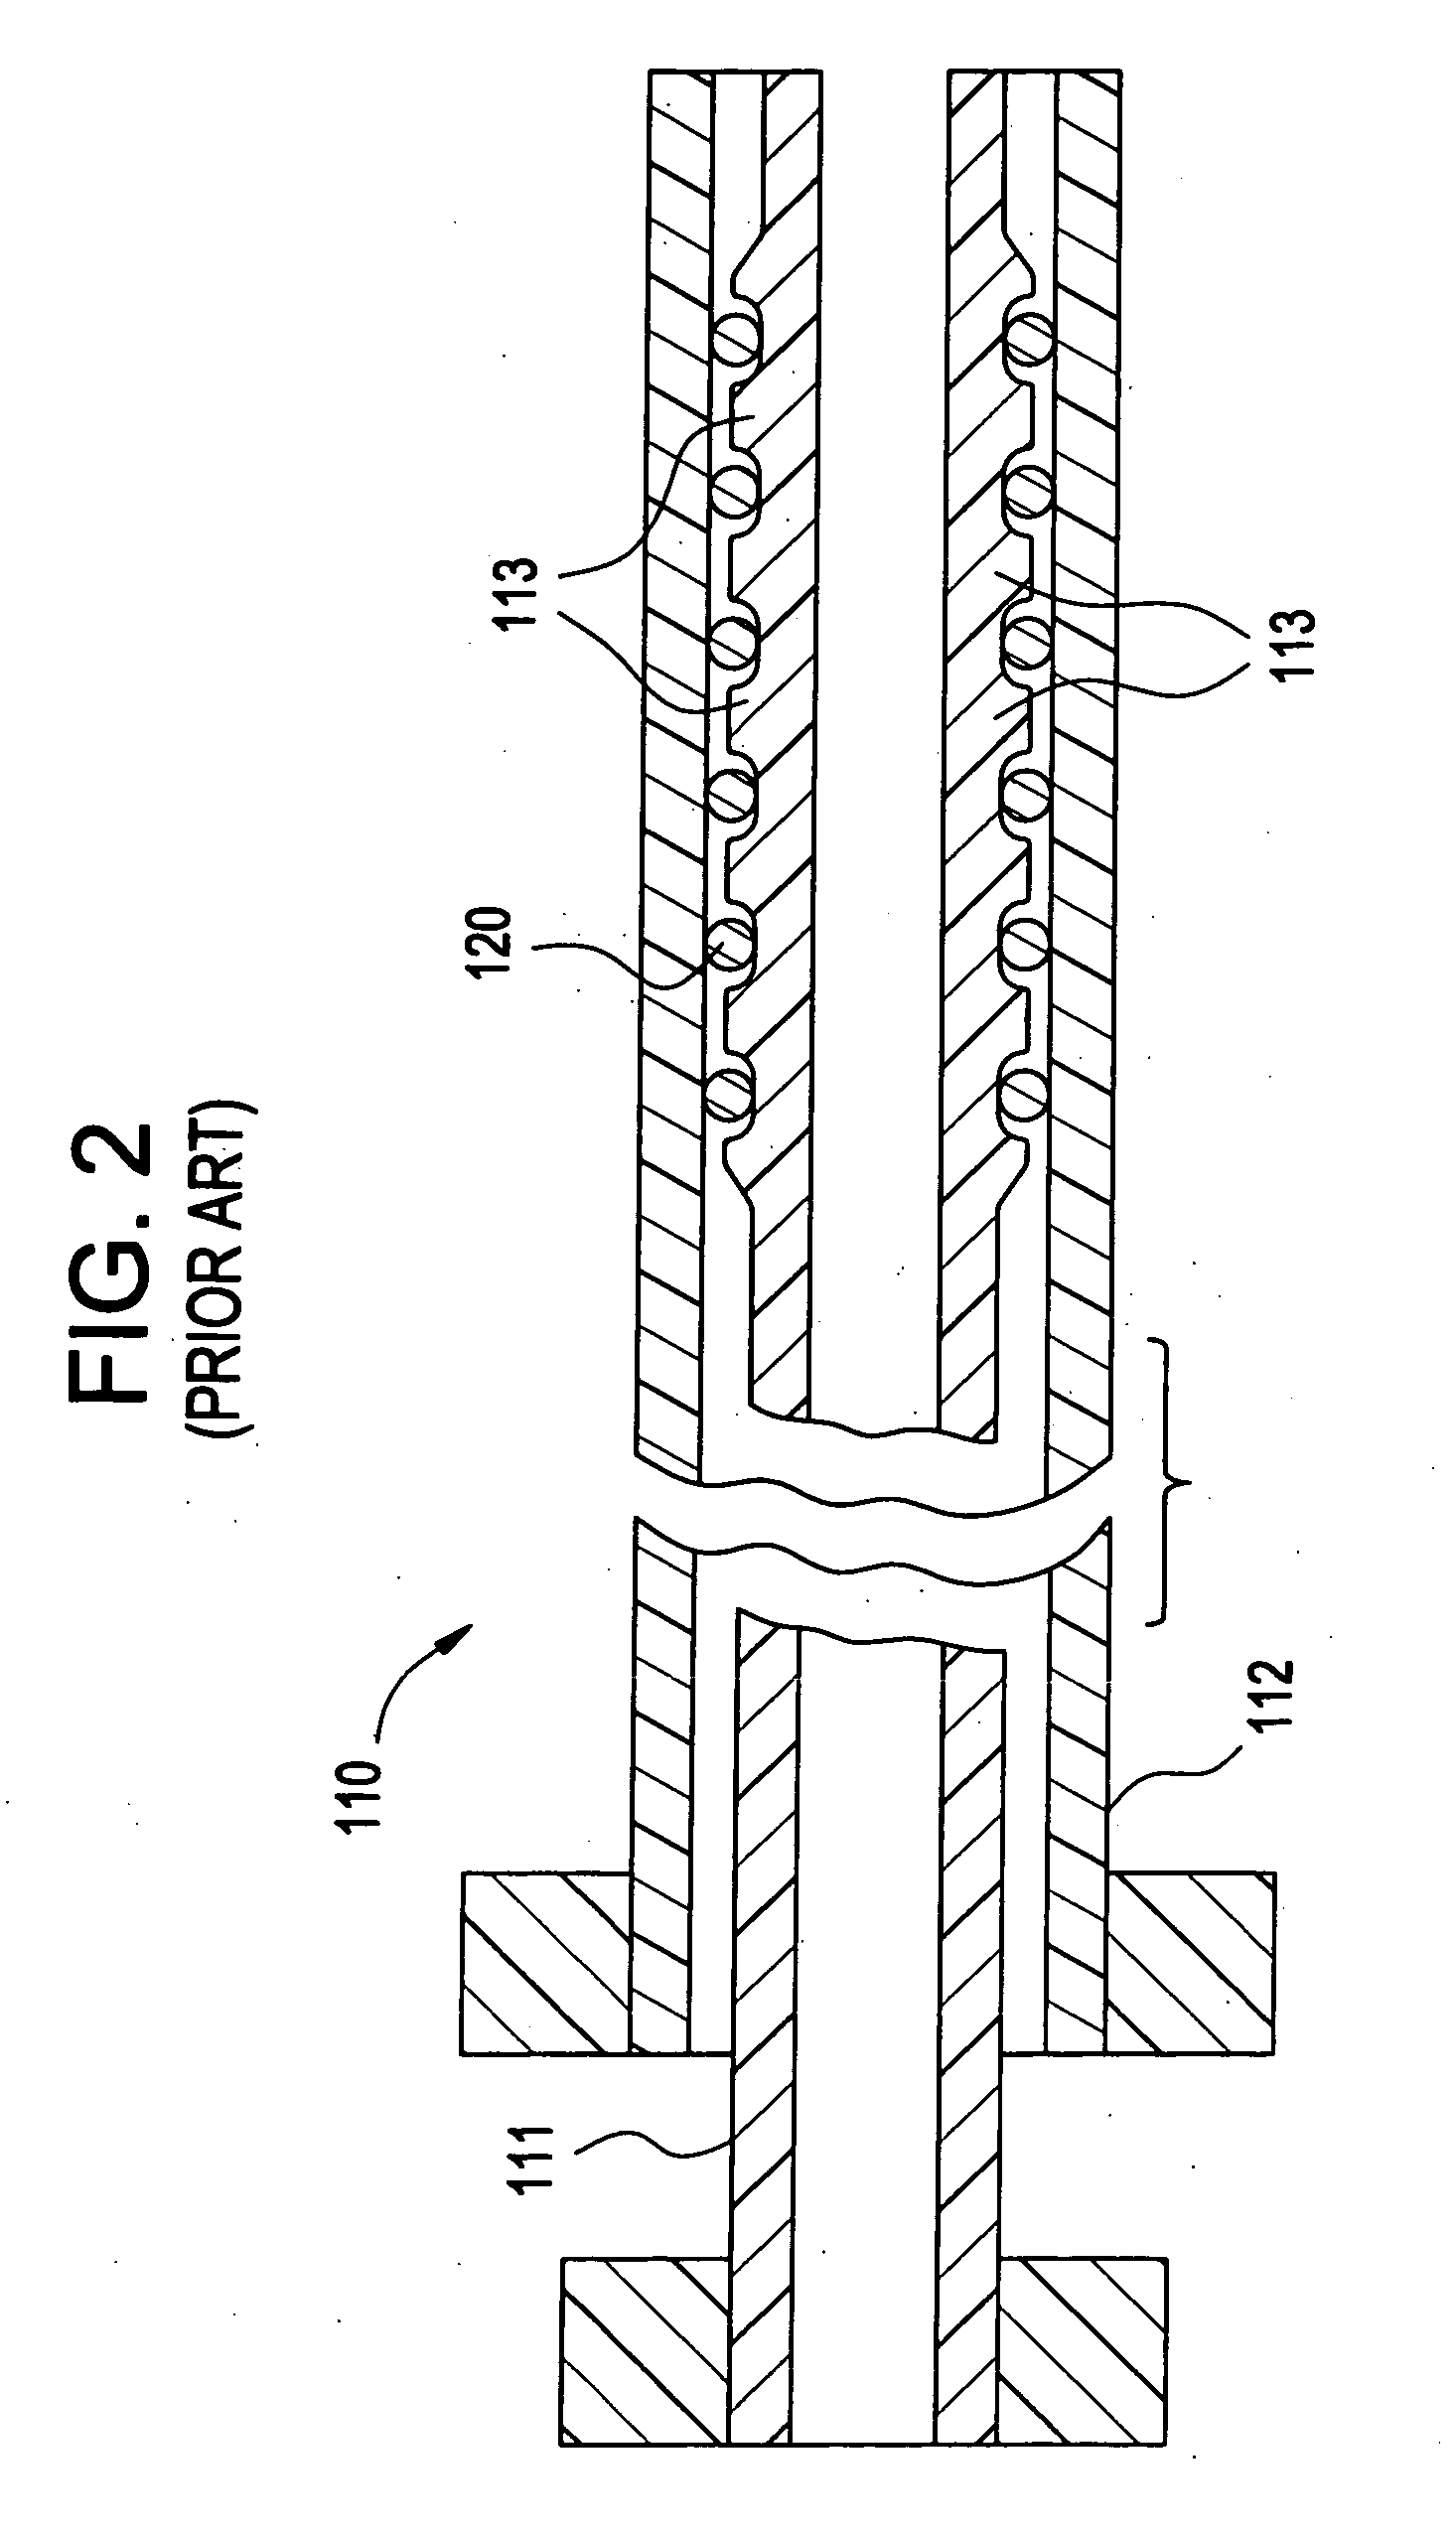 Deployment system for an intraluminal medical device